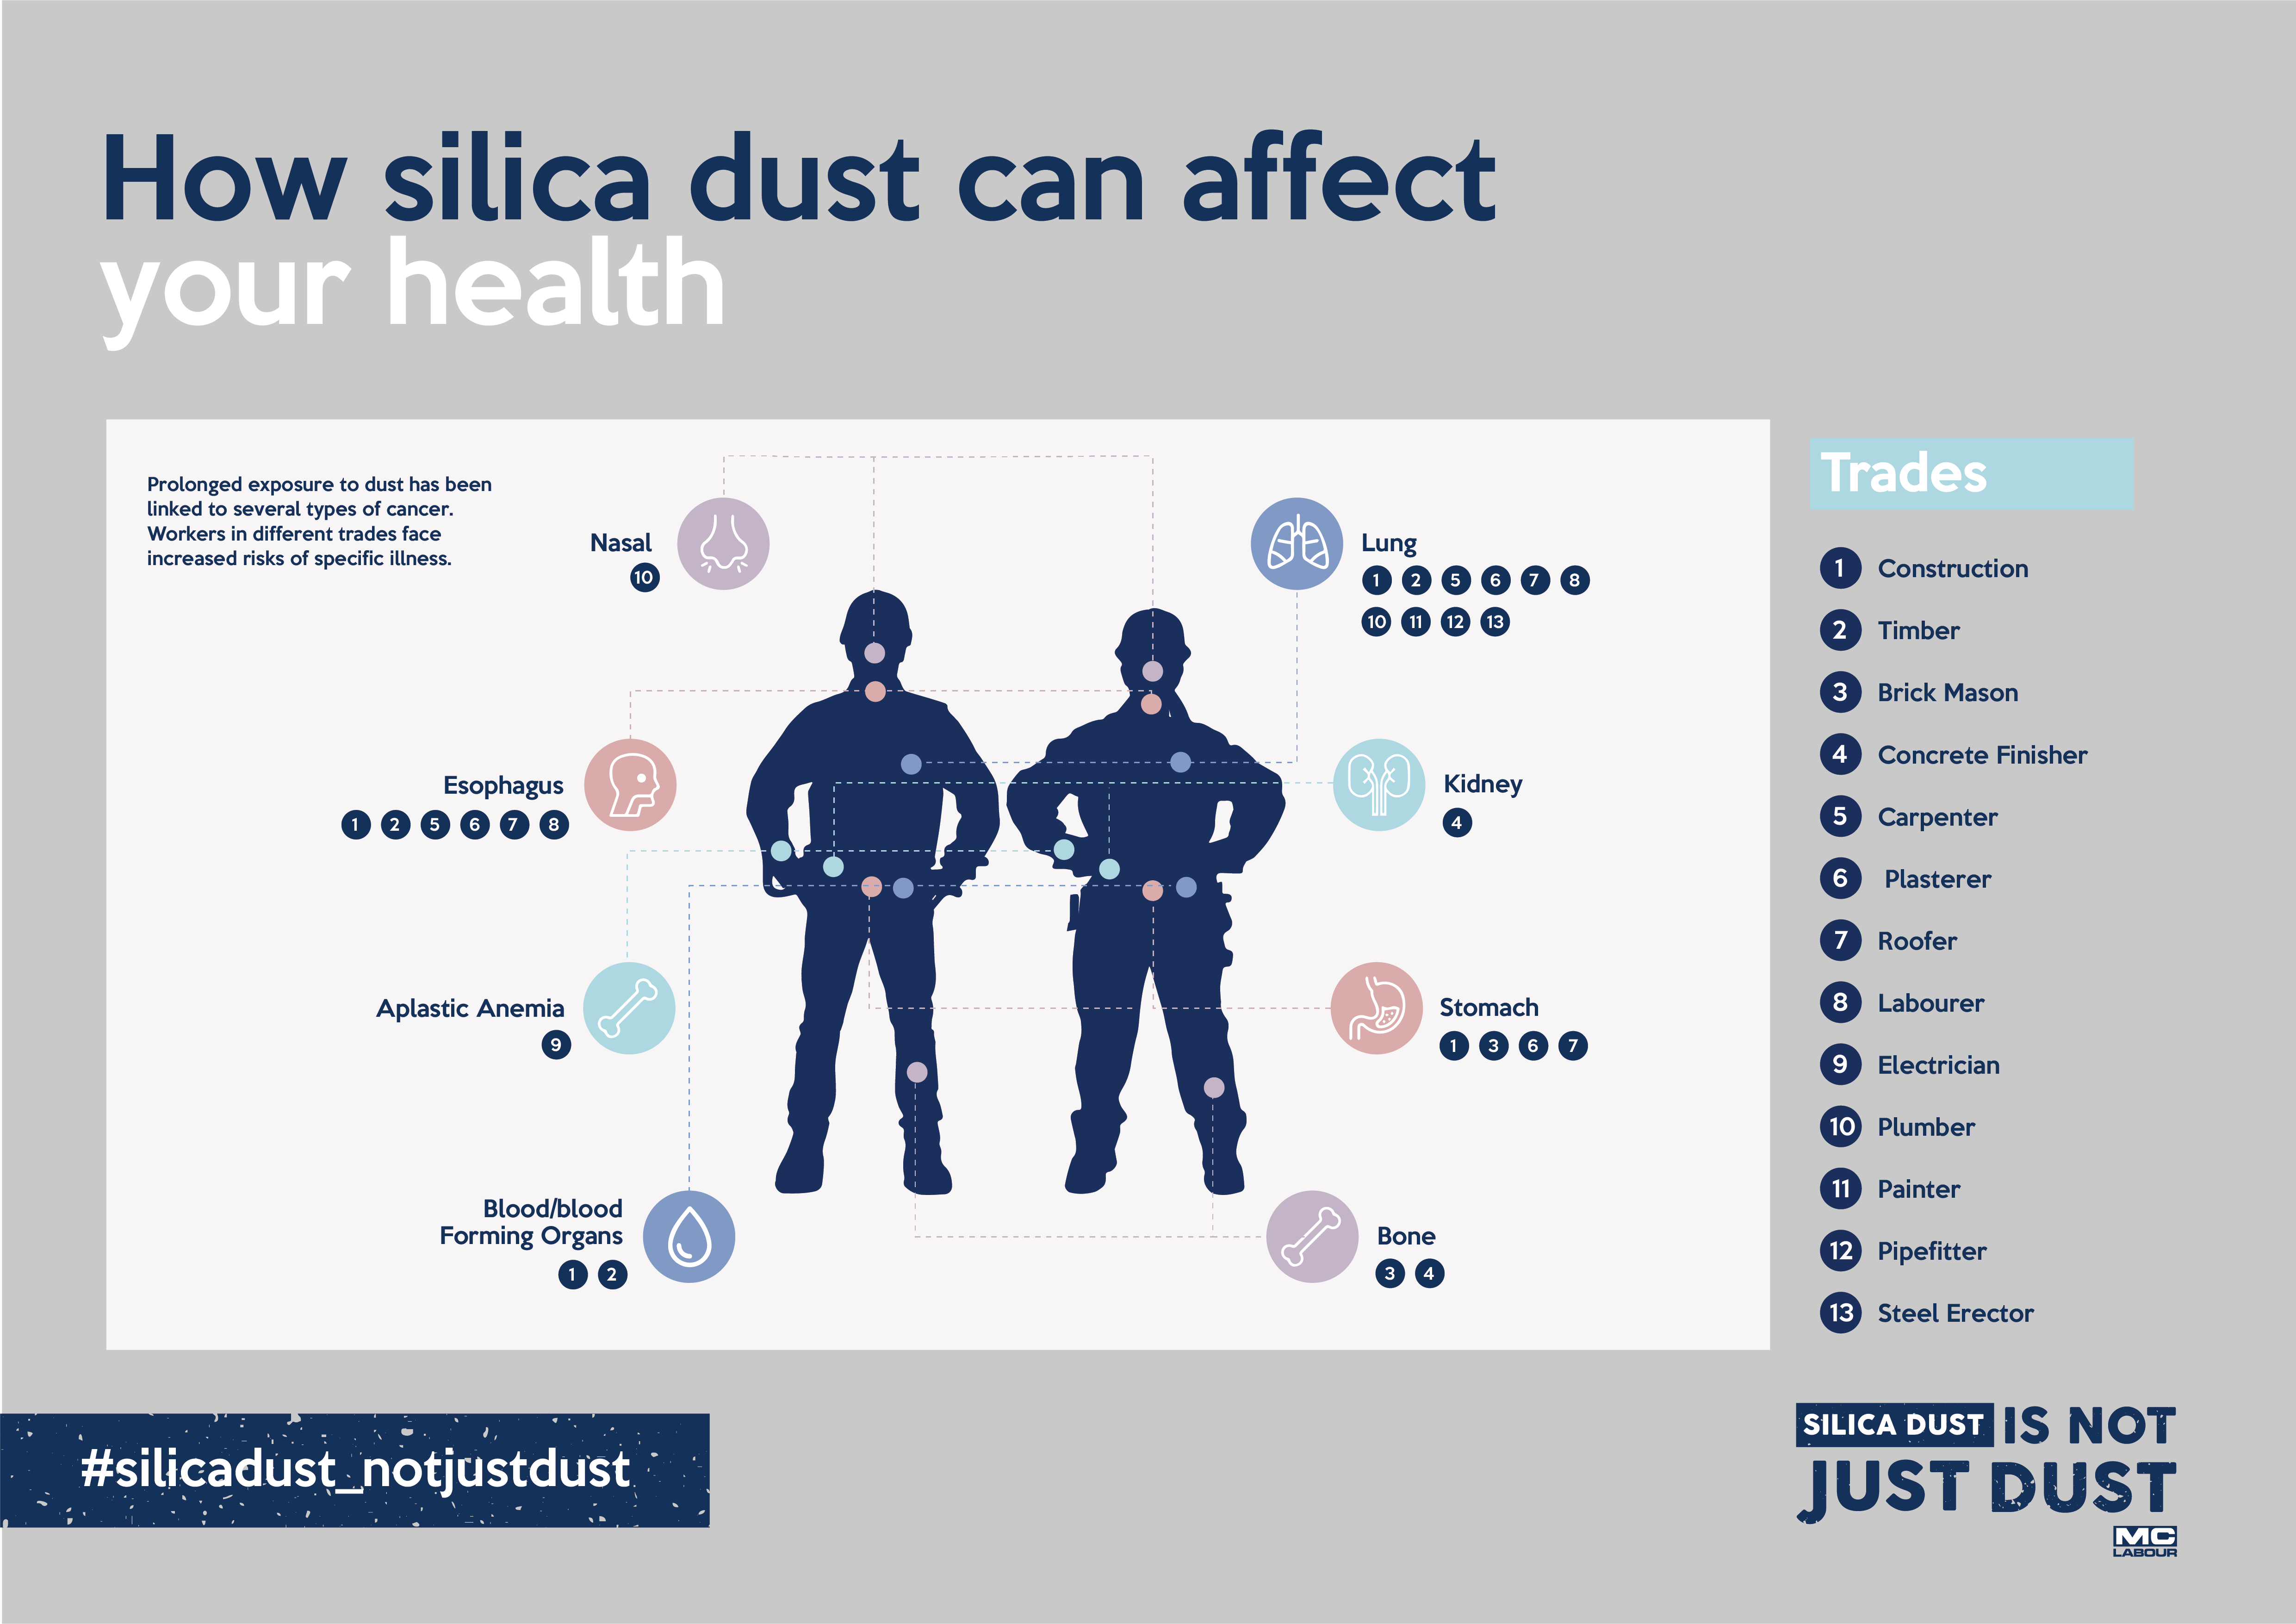 How silica dust can affect health